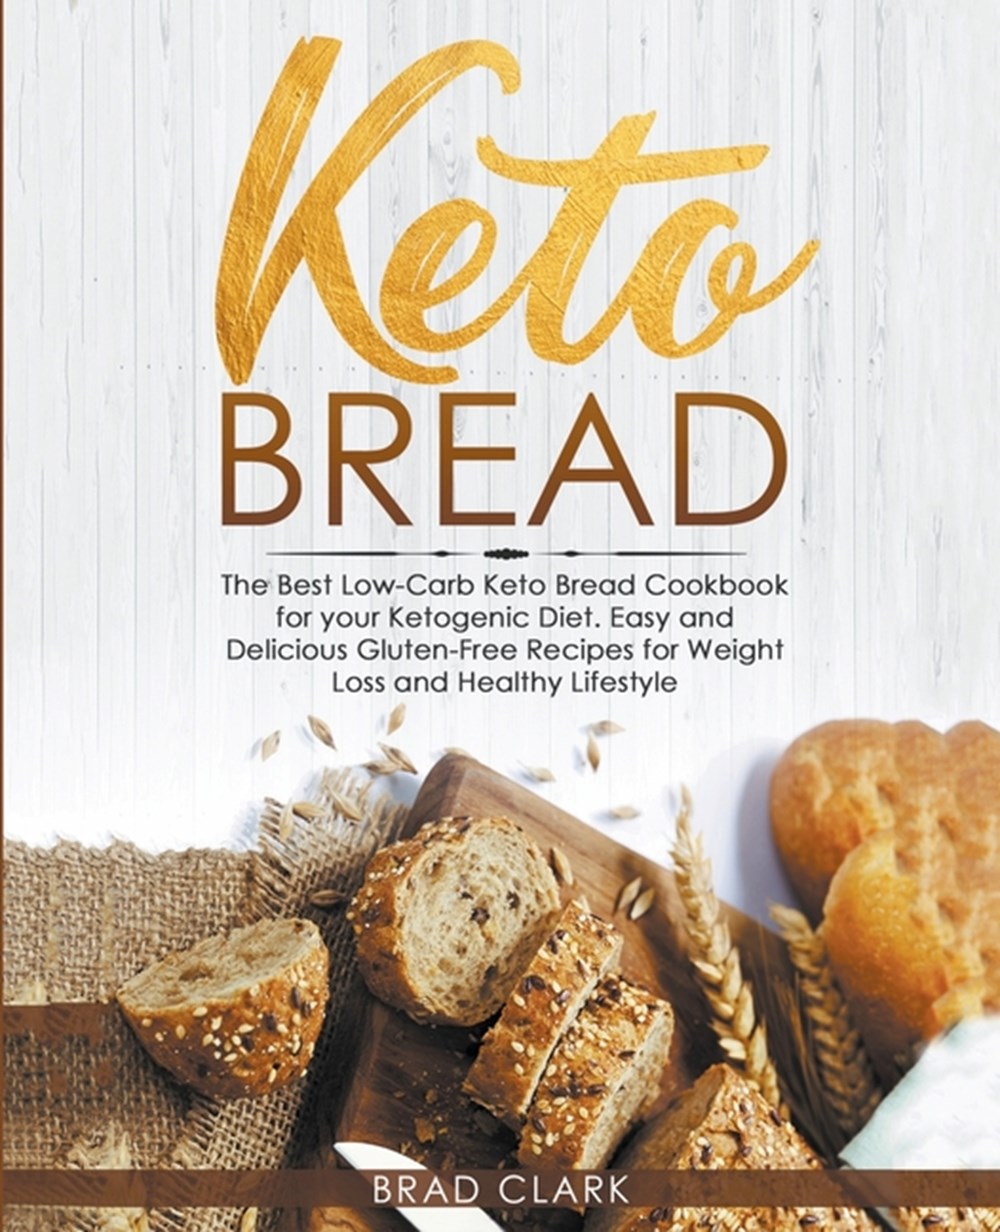 Keto Bread: The Best Low-Carb Keto Bread Cookbook for your Ketogenic Diet - Easy and Quick Gluten-Fr